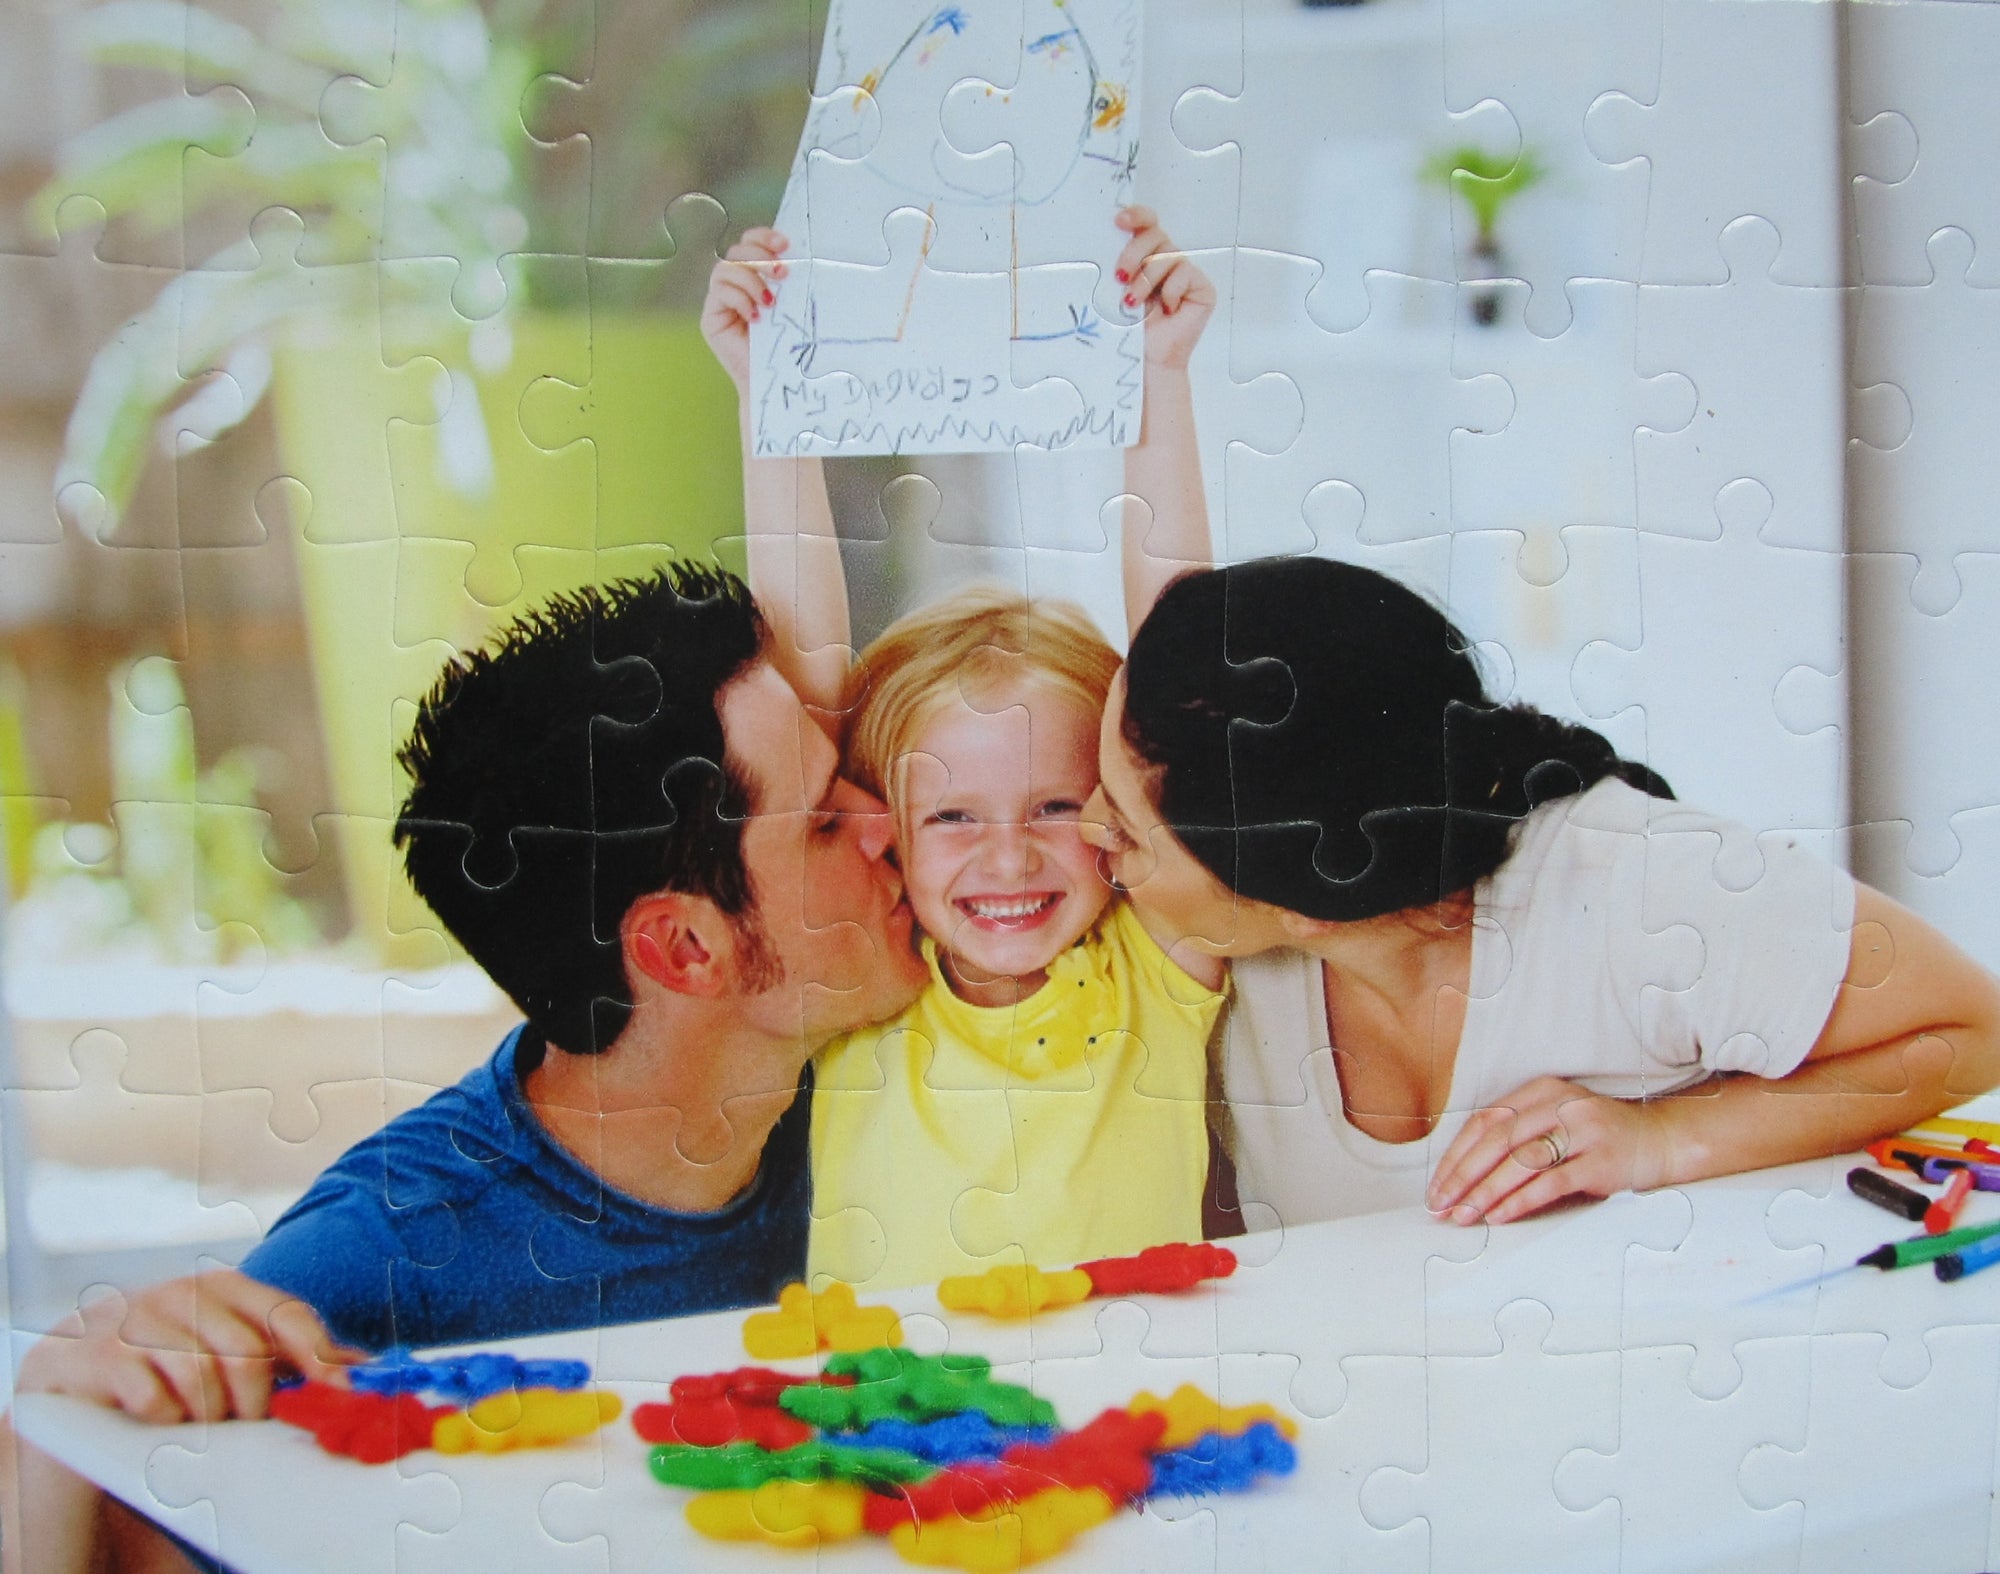 Cheap Custom Puzzle Gift!  Custom puzzle gift.  Showing mom and dad kissing child on each cheek and child loves her custom puzzle. The Missing Piece Puzzle Company